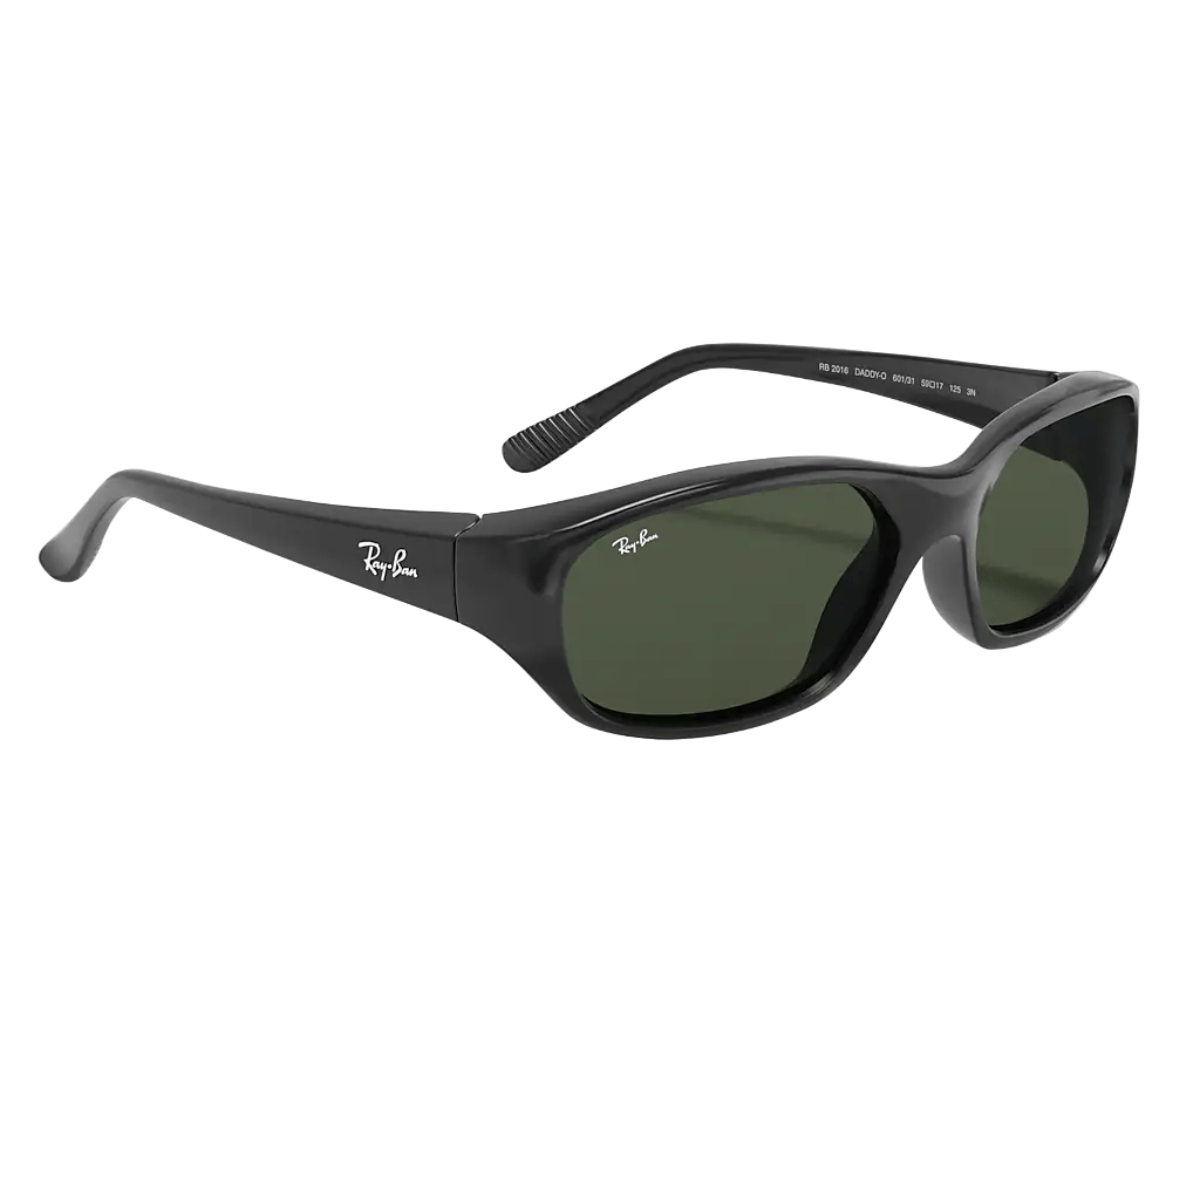 DADDY-O II Sunglasses in Black and Green - RB2016 | Ray-Ban® US